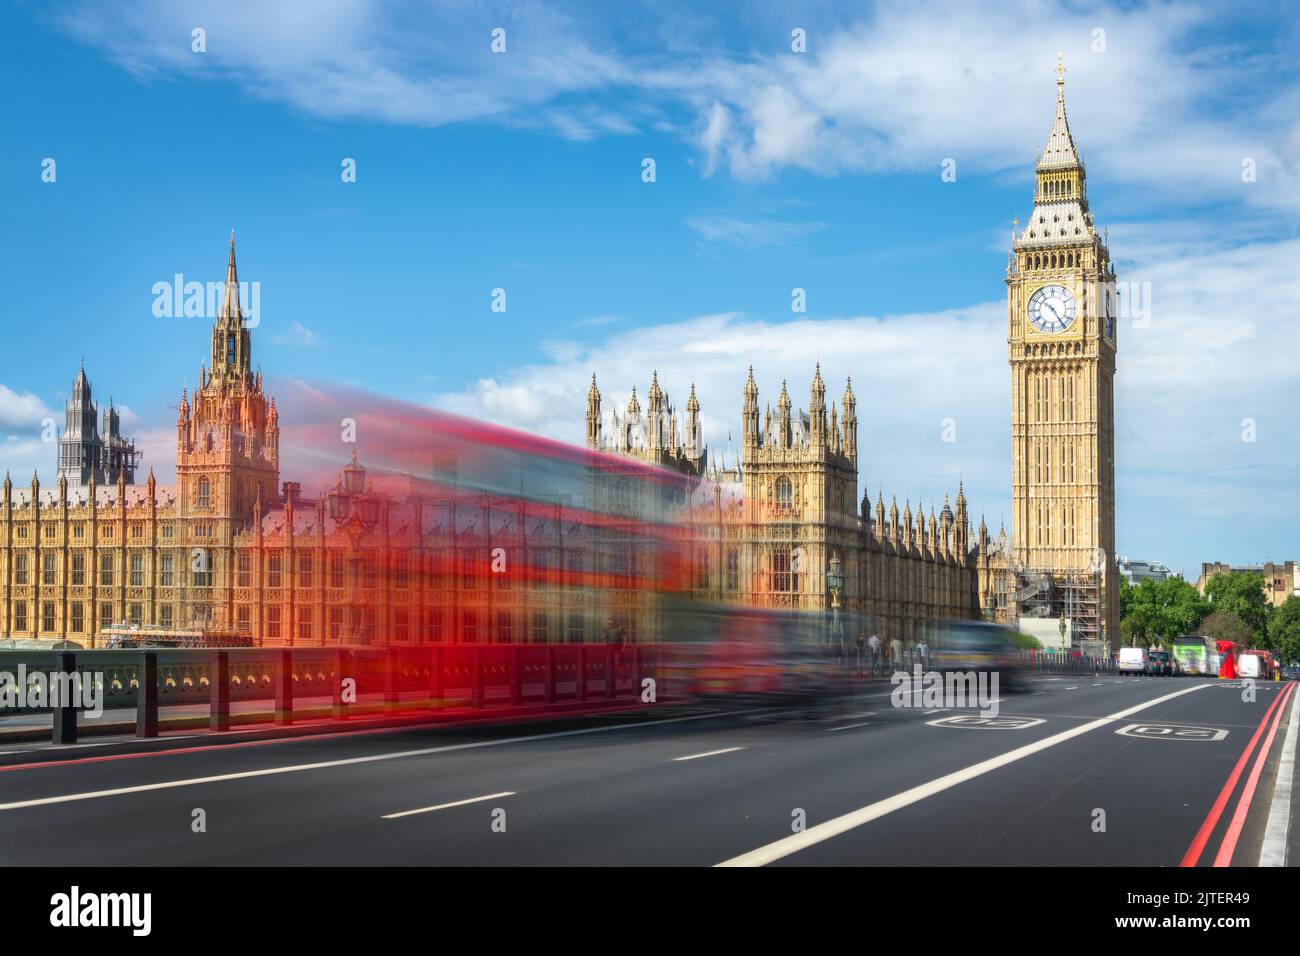 Red double decker bus with motion blur on Westminster bridge, Big Ben in the background, in London, UK Stock Photo